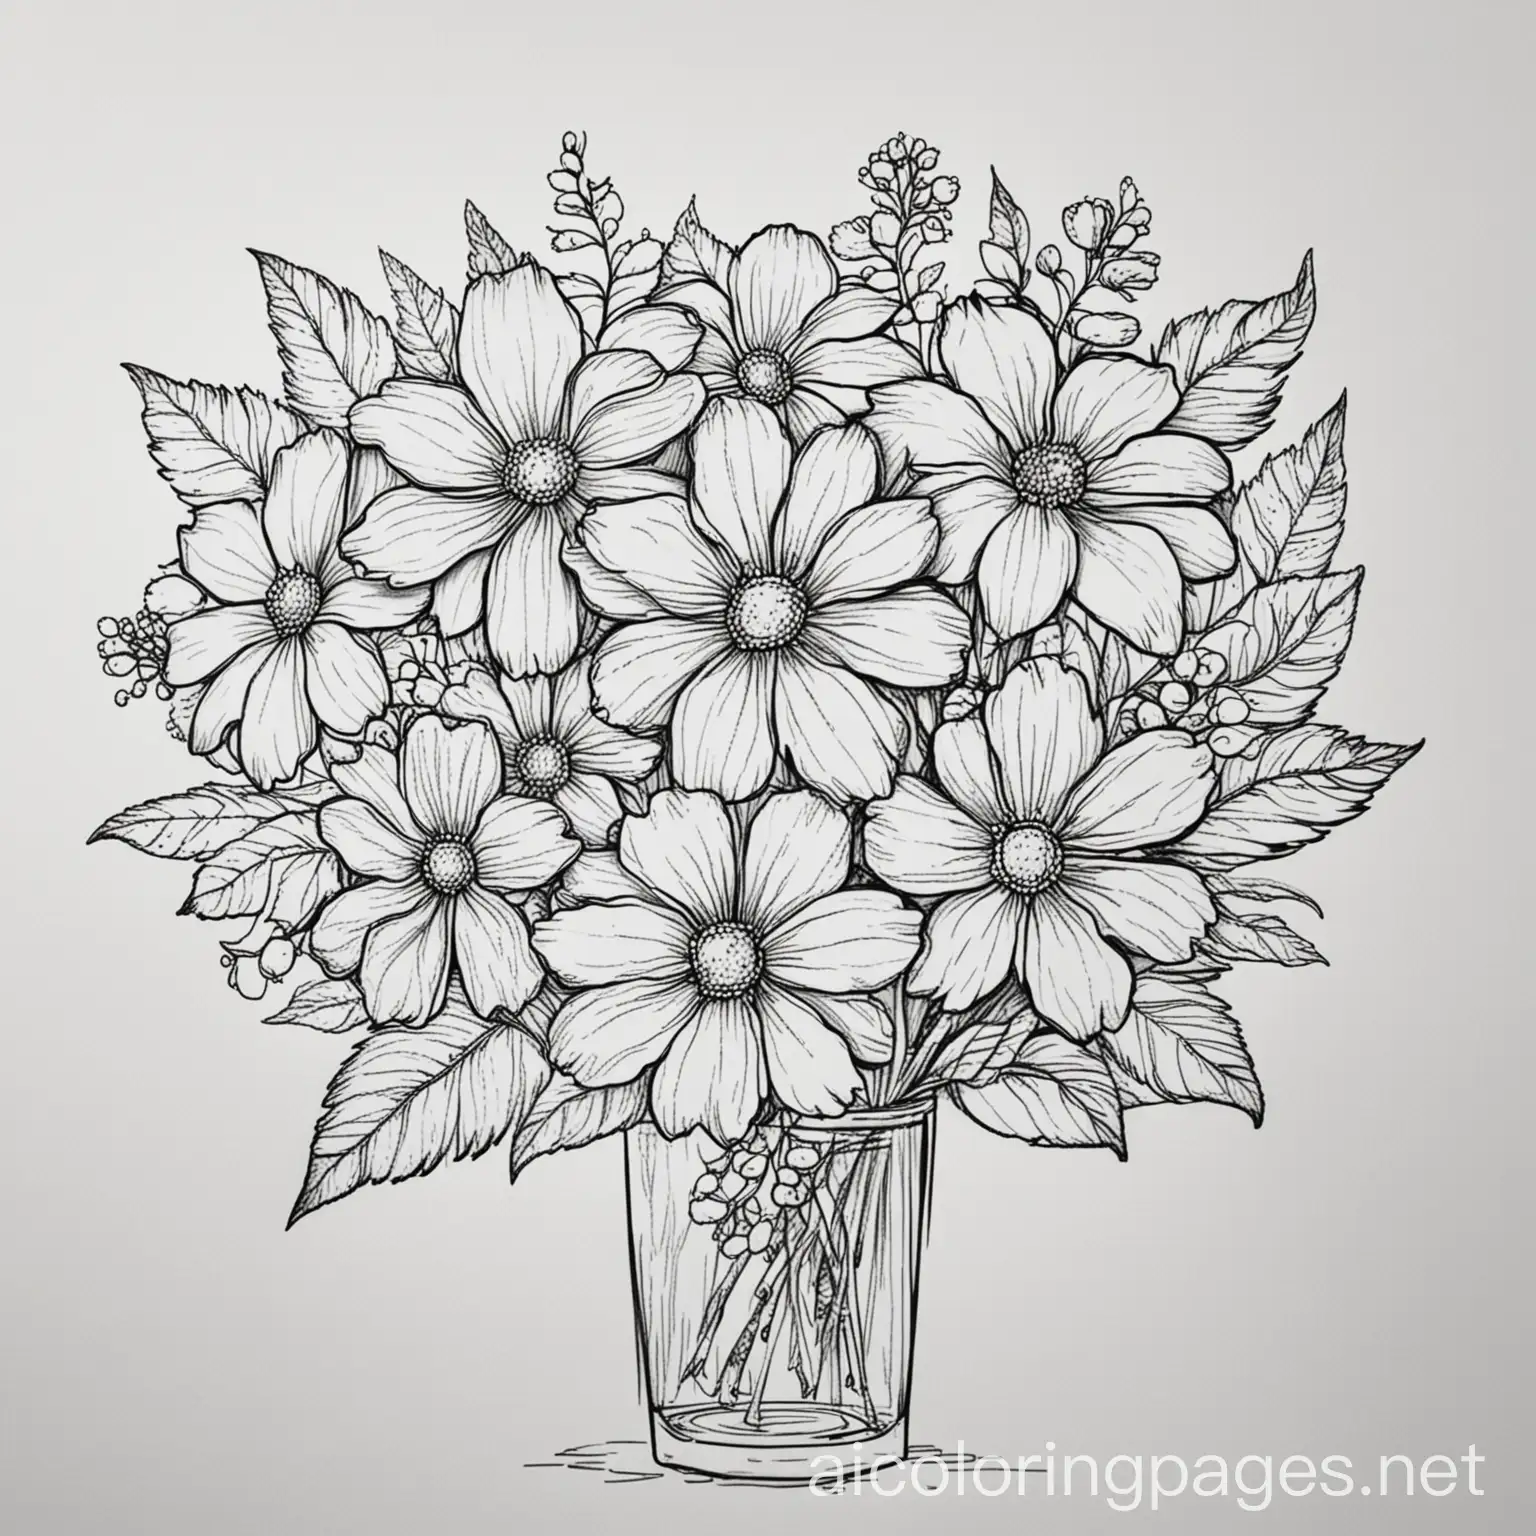 Bouquet of flower, Coloring Page, black and white, line art, white background, Simplicity, Ample White Space. The background of the coloring page is plain white to make it easy for young children to color within the lines. The outlines of all the subjects are easy to distinguish, making it simple for kids to color without too much difficulty, Coloring Page, black and white, line art, white background, Simplicity, Ample White Space. The background of the coloring page is plain white to make it easy for young children to color within the lines. The outlines of all the subjects are easy to distinguish, making it simple for kids to color without too much difficulty